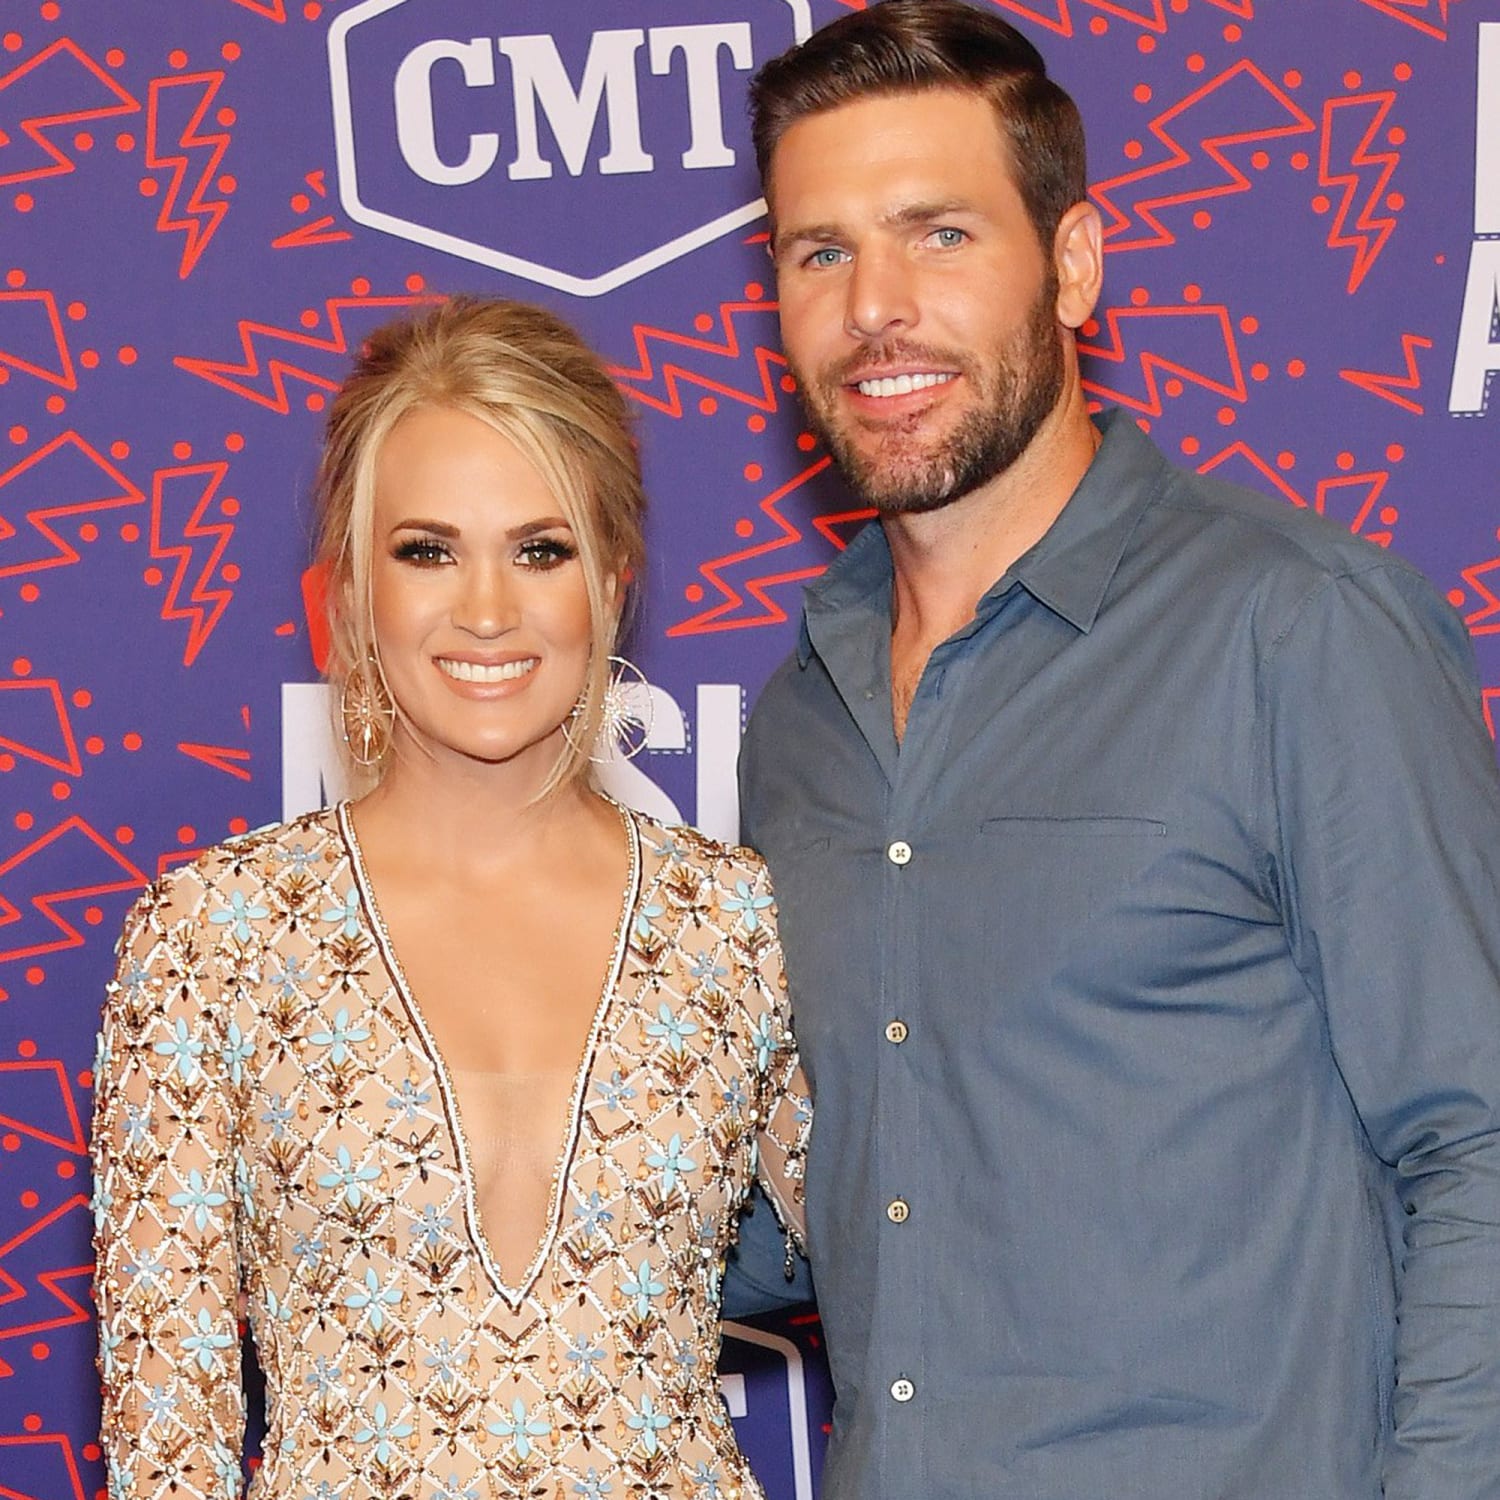 Carrie Underwood marks 11th wedding anniversary with husband Mike Fisher -  ABC News